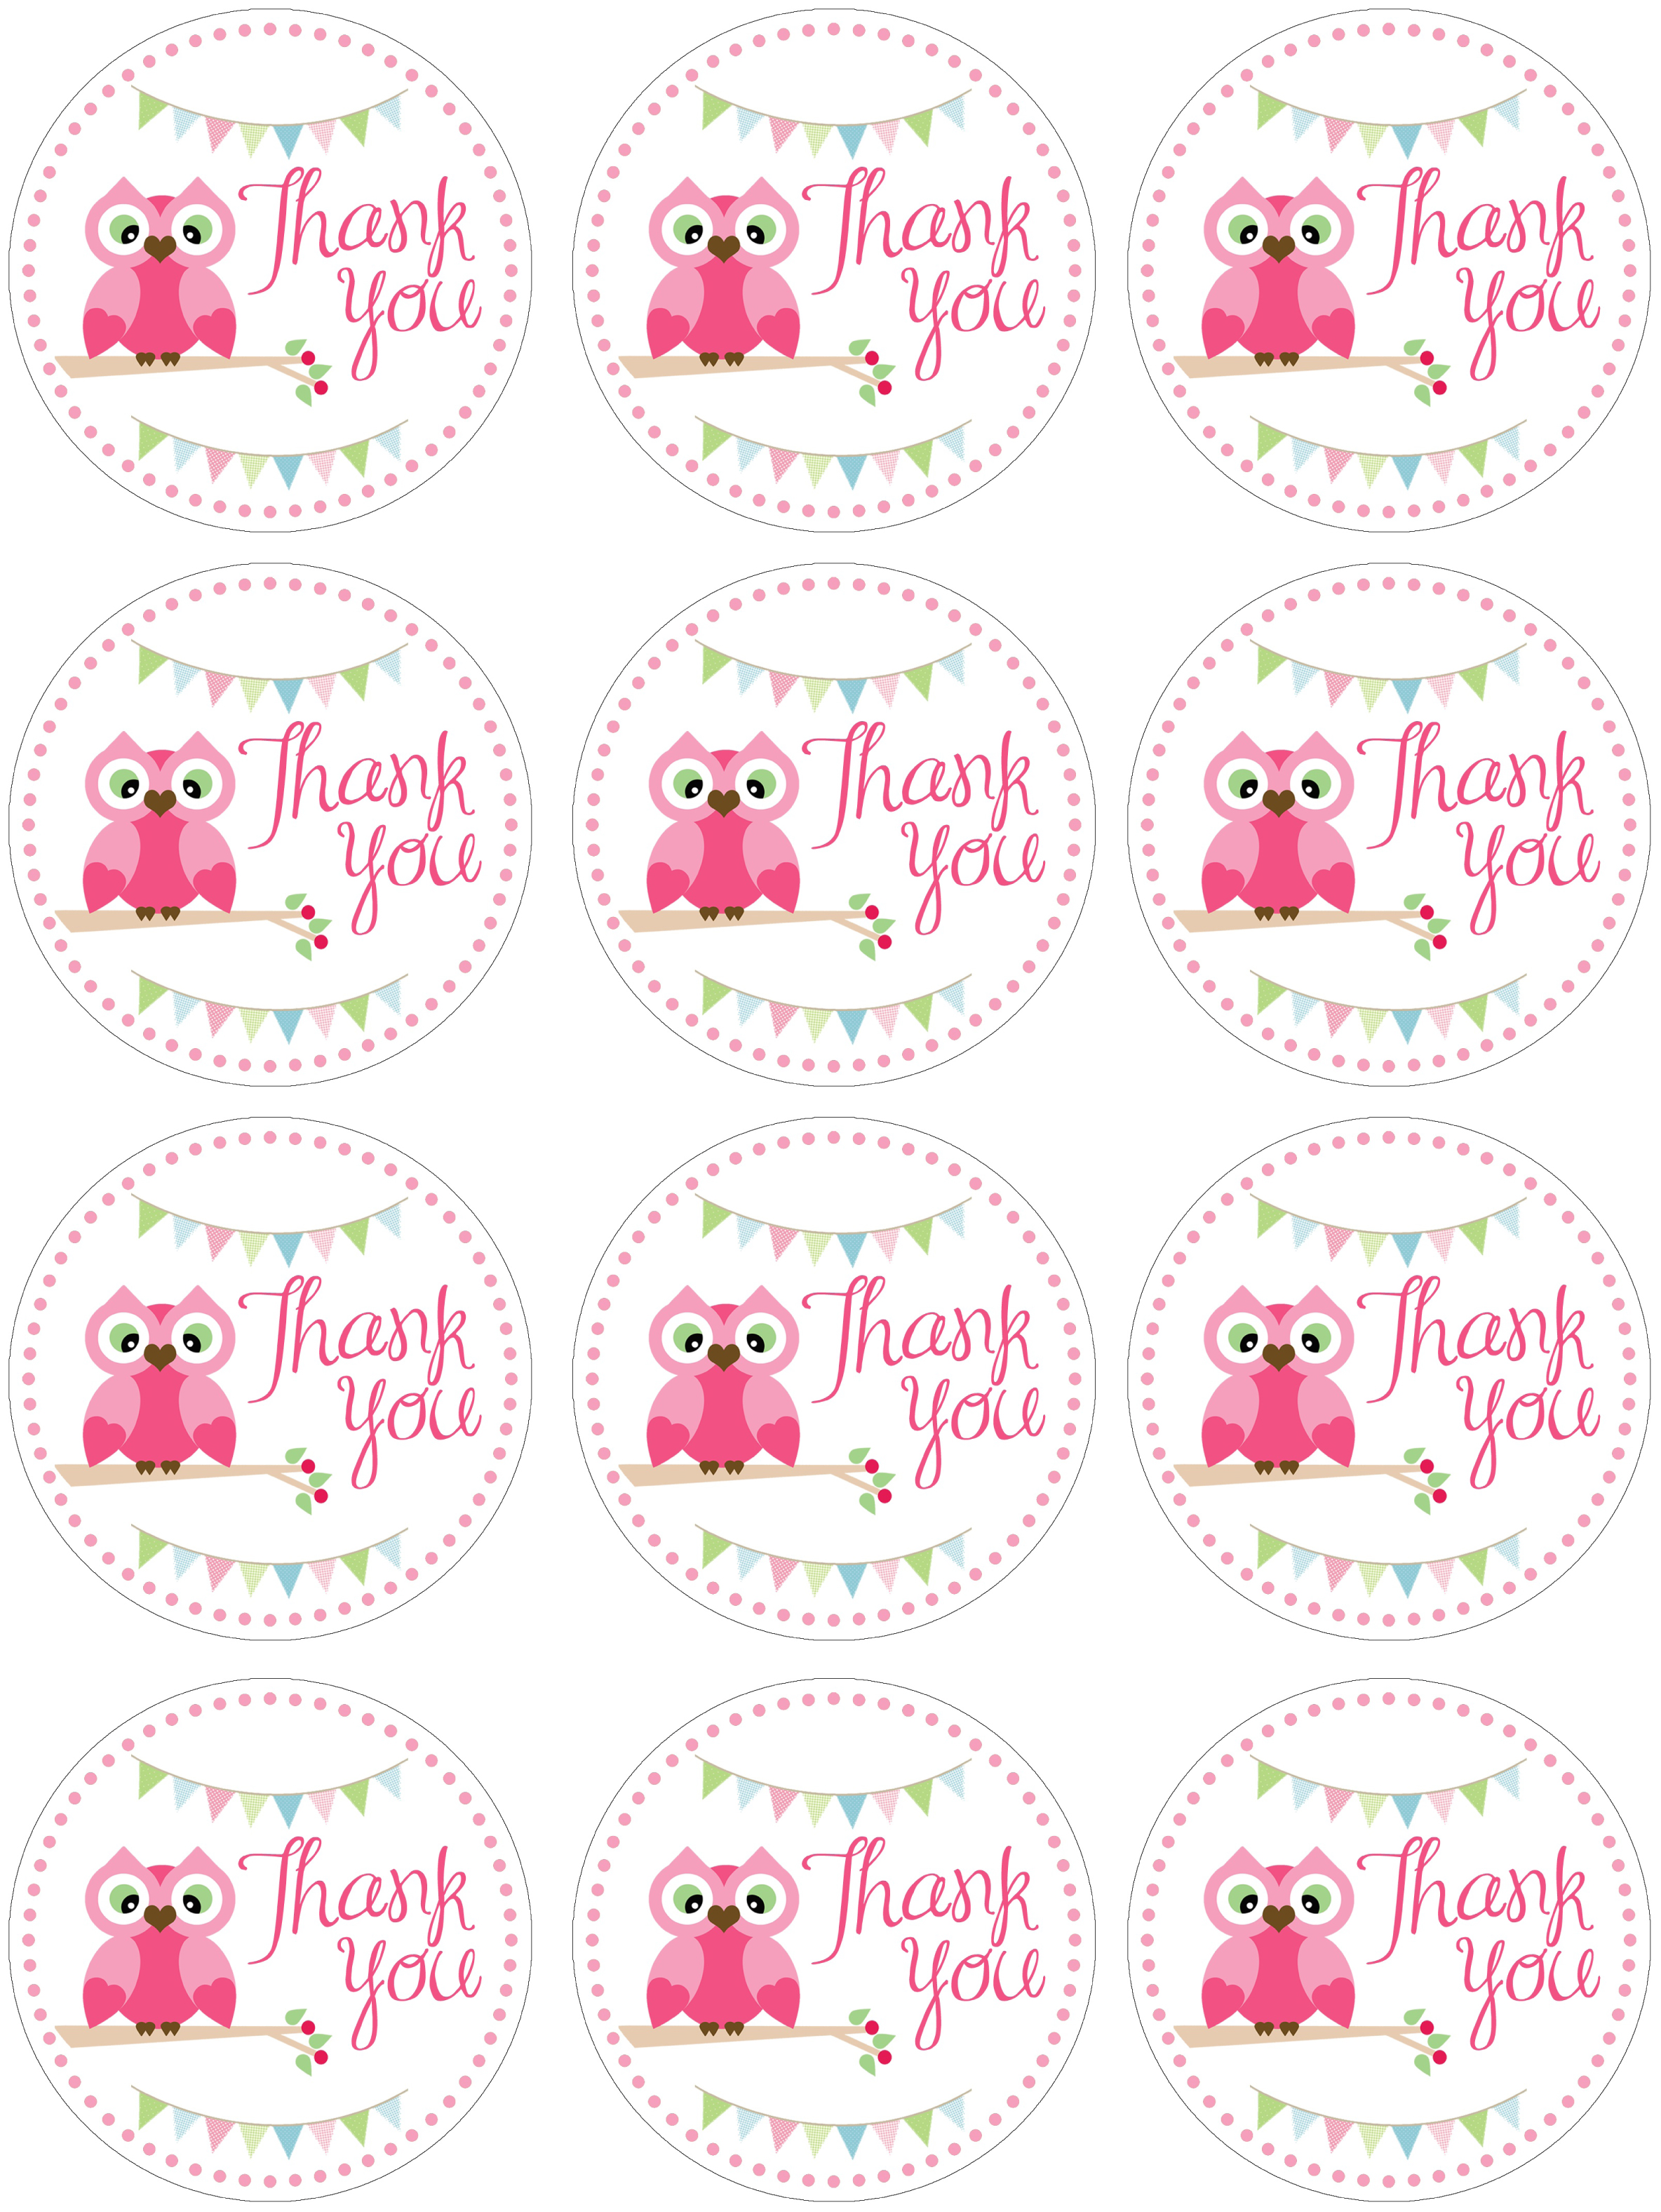 23 Free Party Favor Label Printables - diy Thought Inside Goodie Bag Label Template